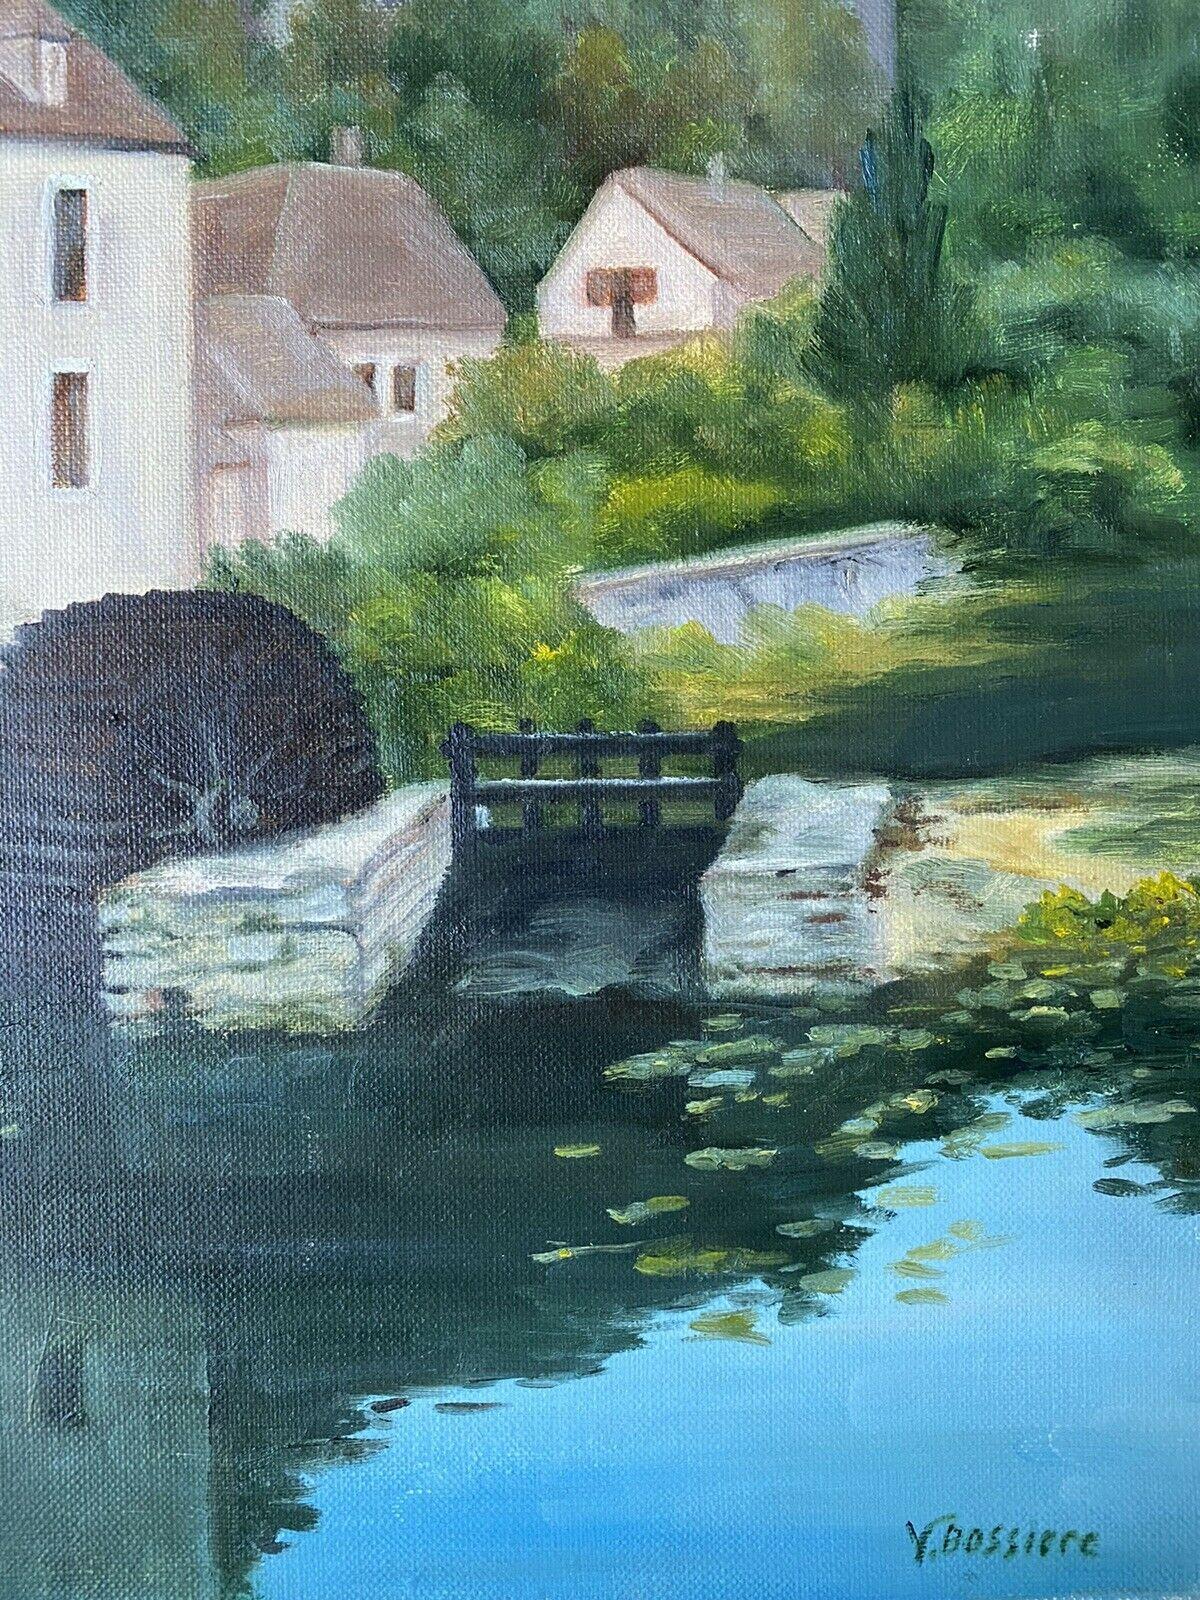 The Old Watermill, Tranquil French River Landscape Deep Green Soupy River water - Painting by Yvette Bossiere